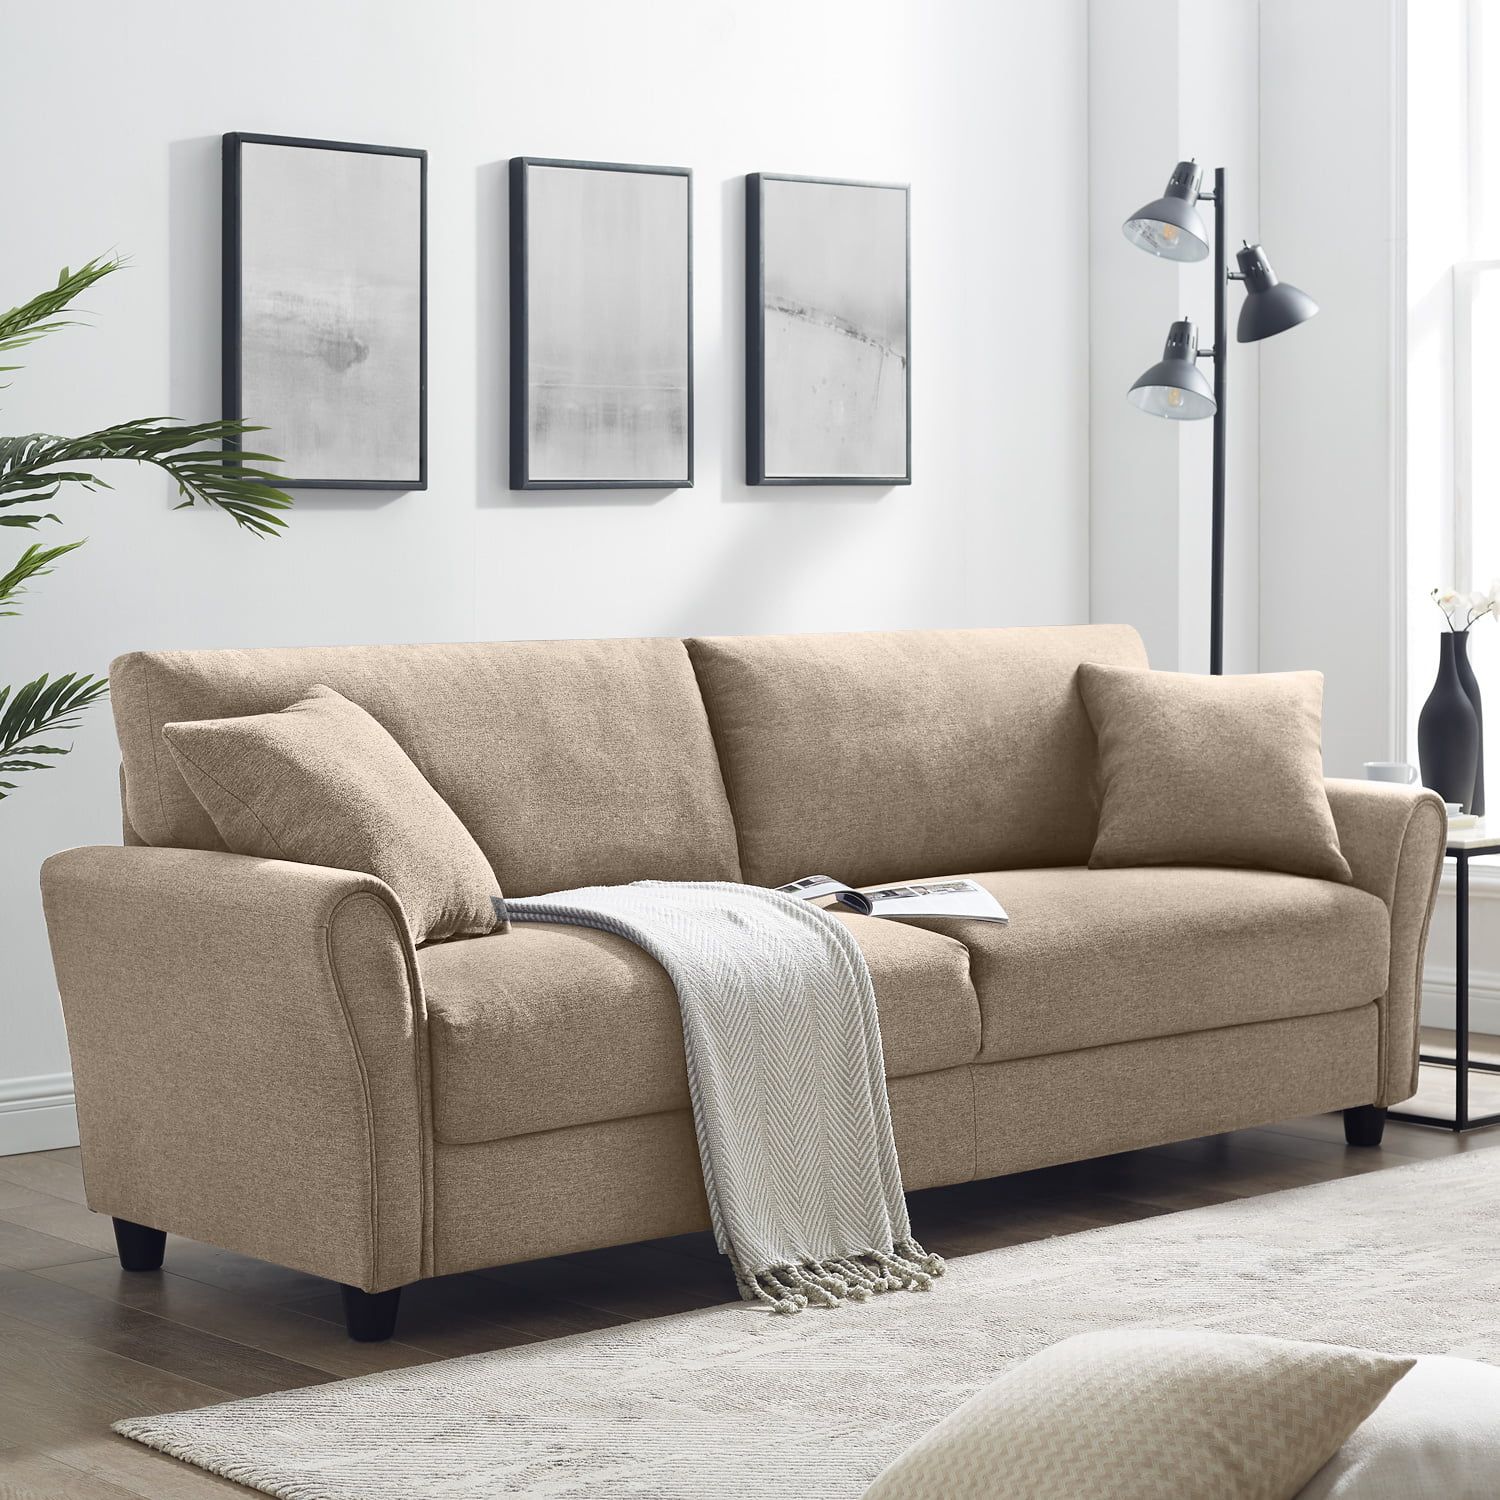 Upholstered 85 Inch Sofa Modern Linen Living Room Couch – Walmart Within Sofas For Living Rooms (Gallery 11 of 20)